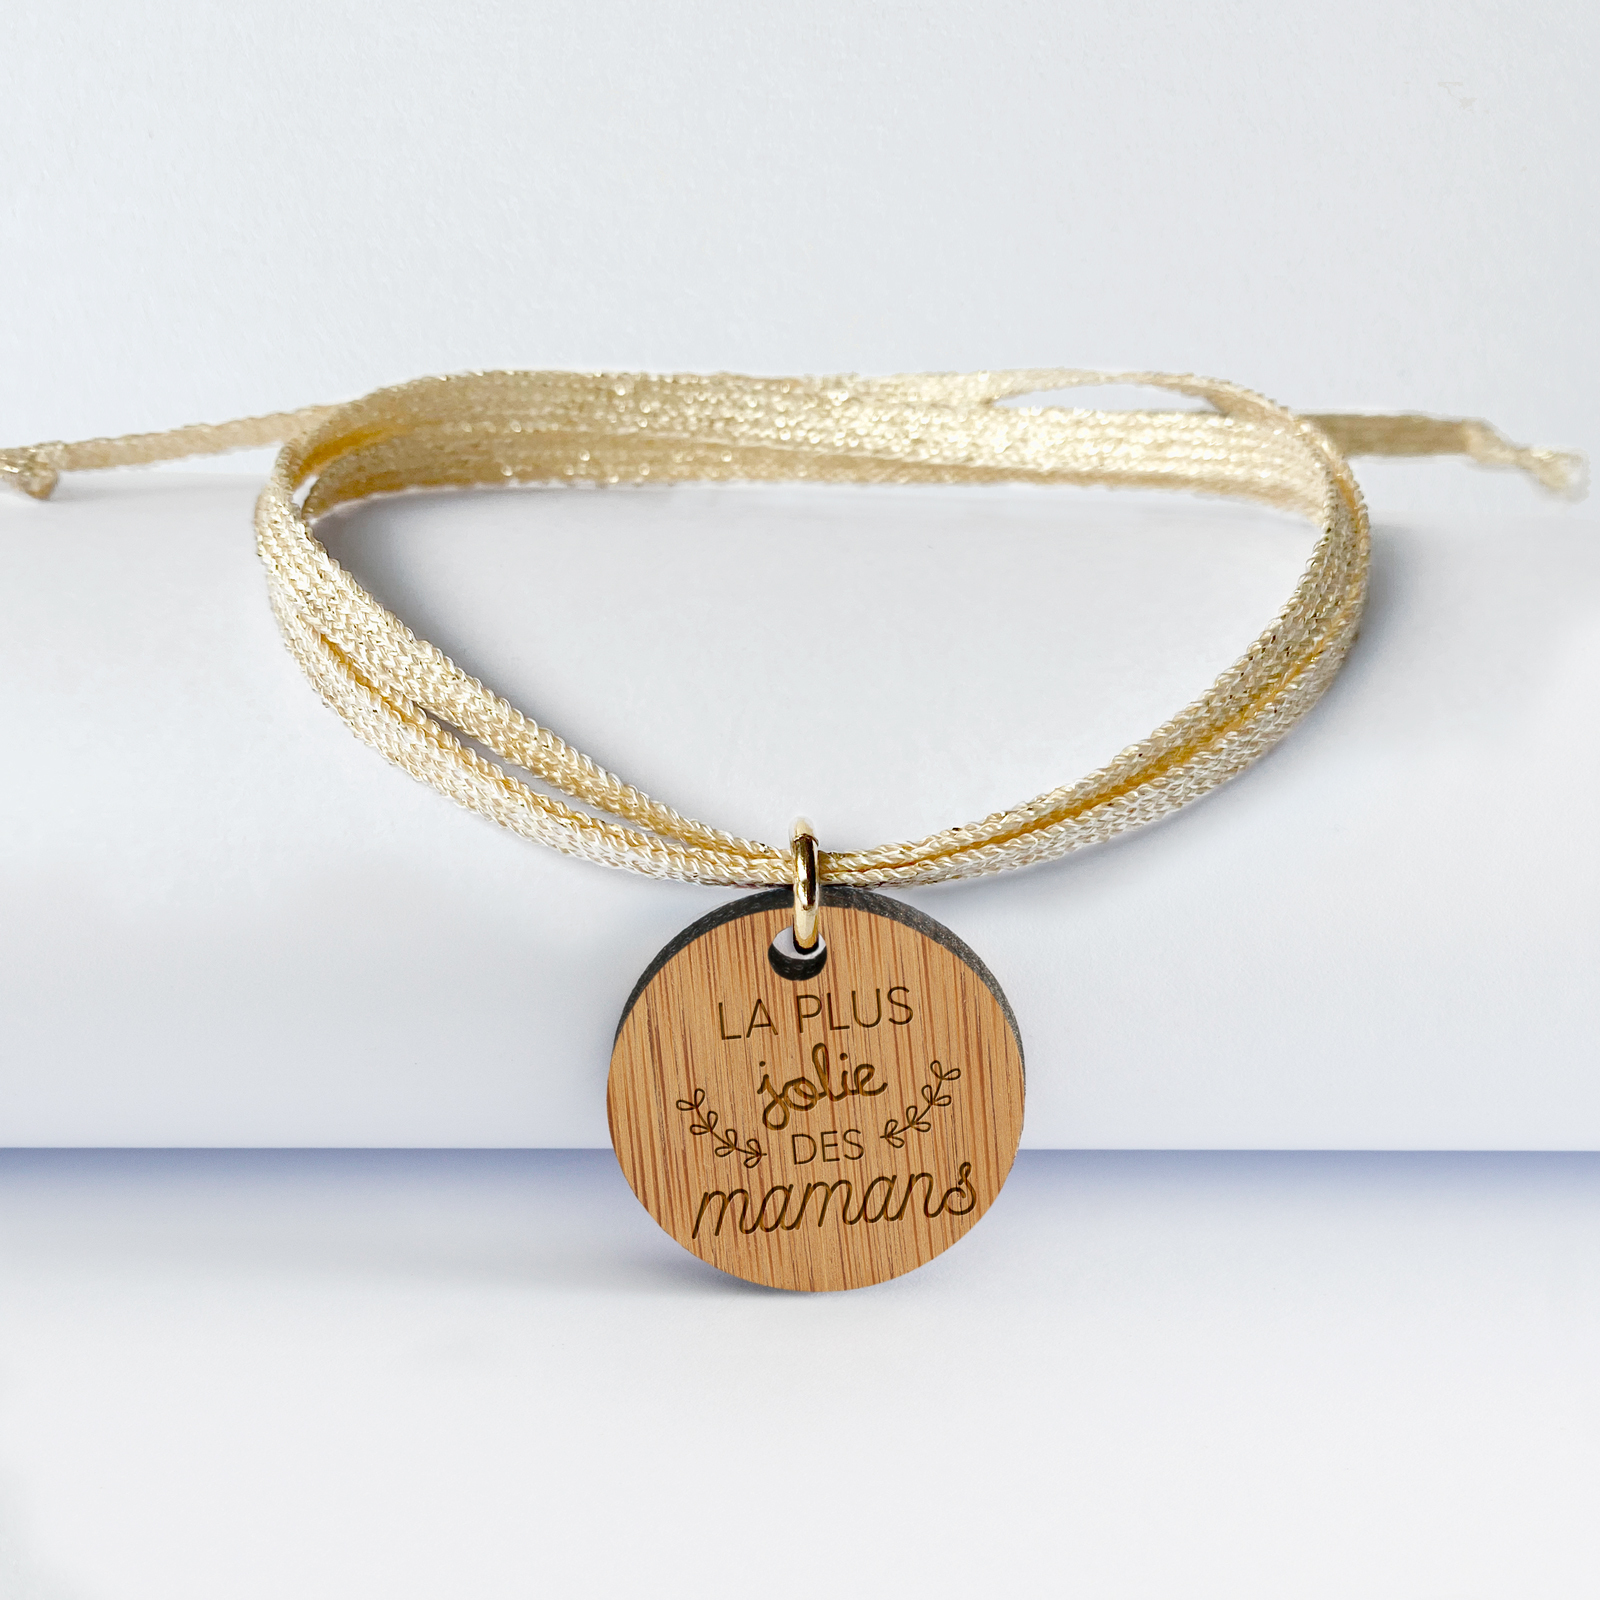 Personalised 3 turn bracelet engraved medal with round sleeper wood 20 mm - special edition "La plus jolie des mamans"